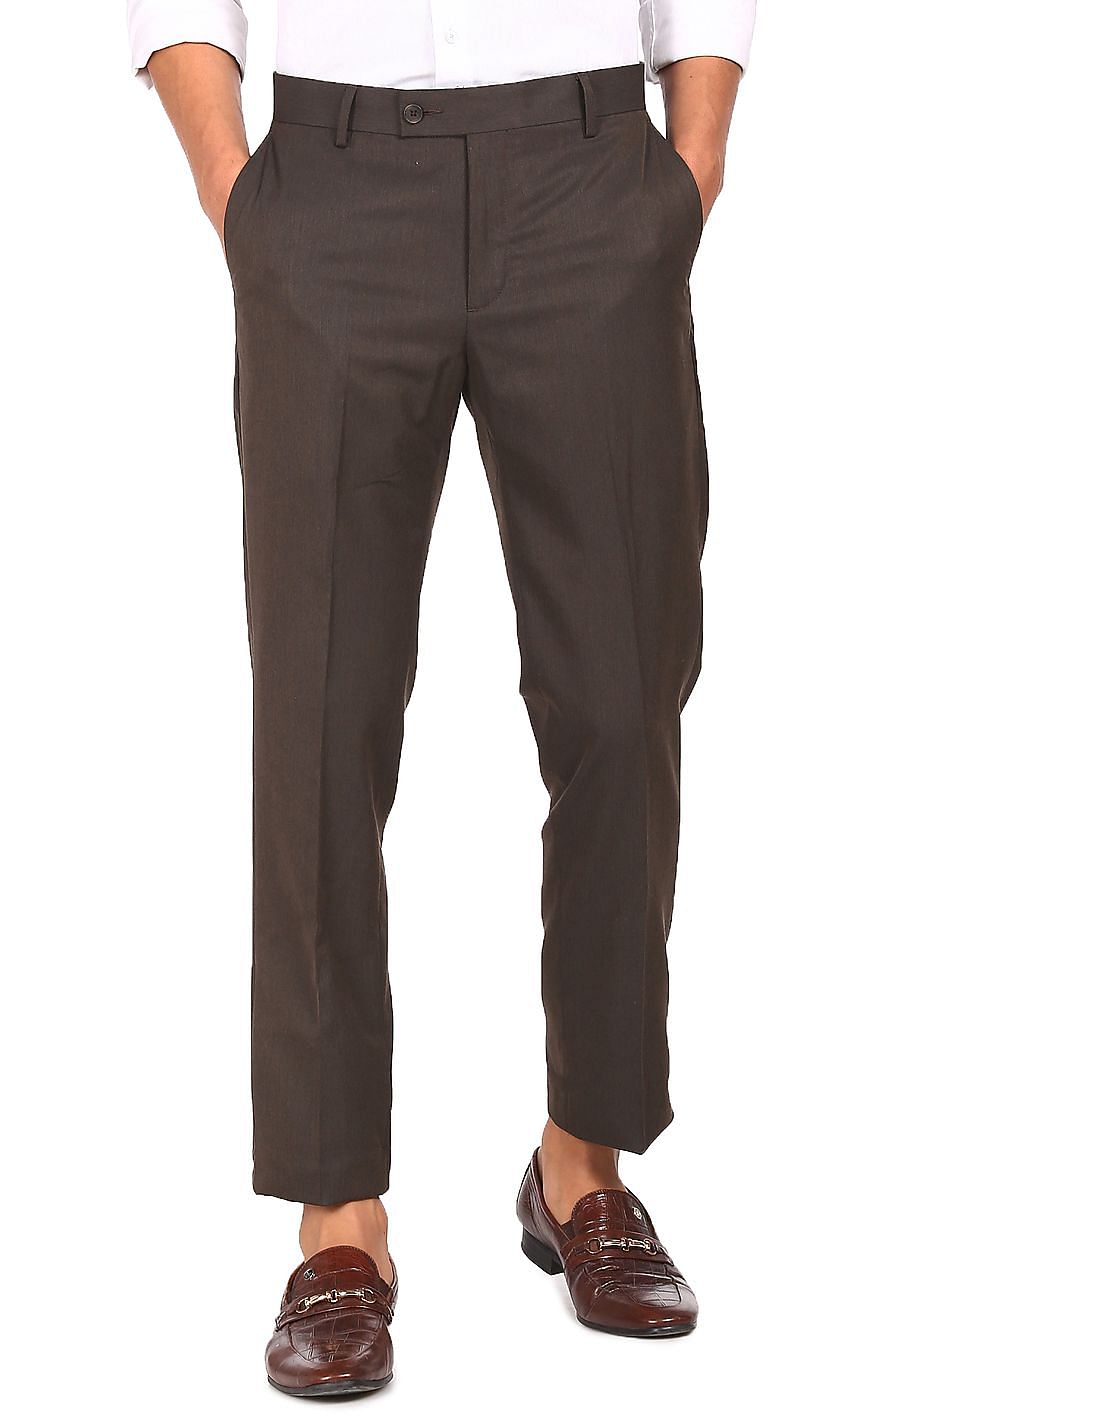 Mens Blue Polyester Solid Flat Front Formal Trousers